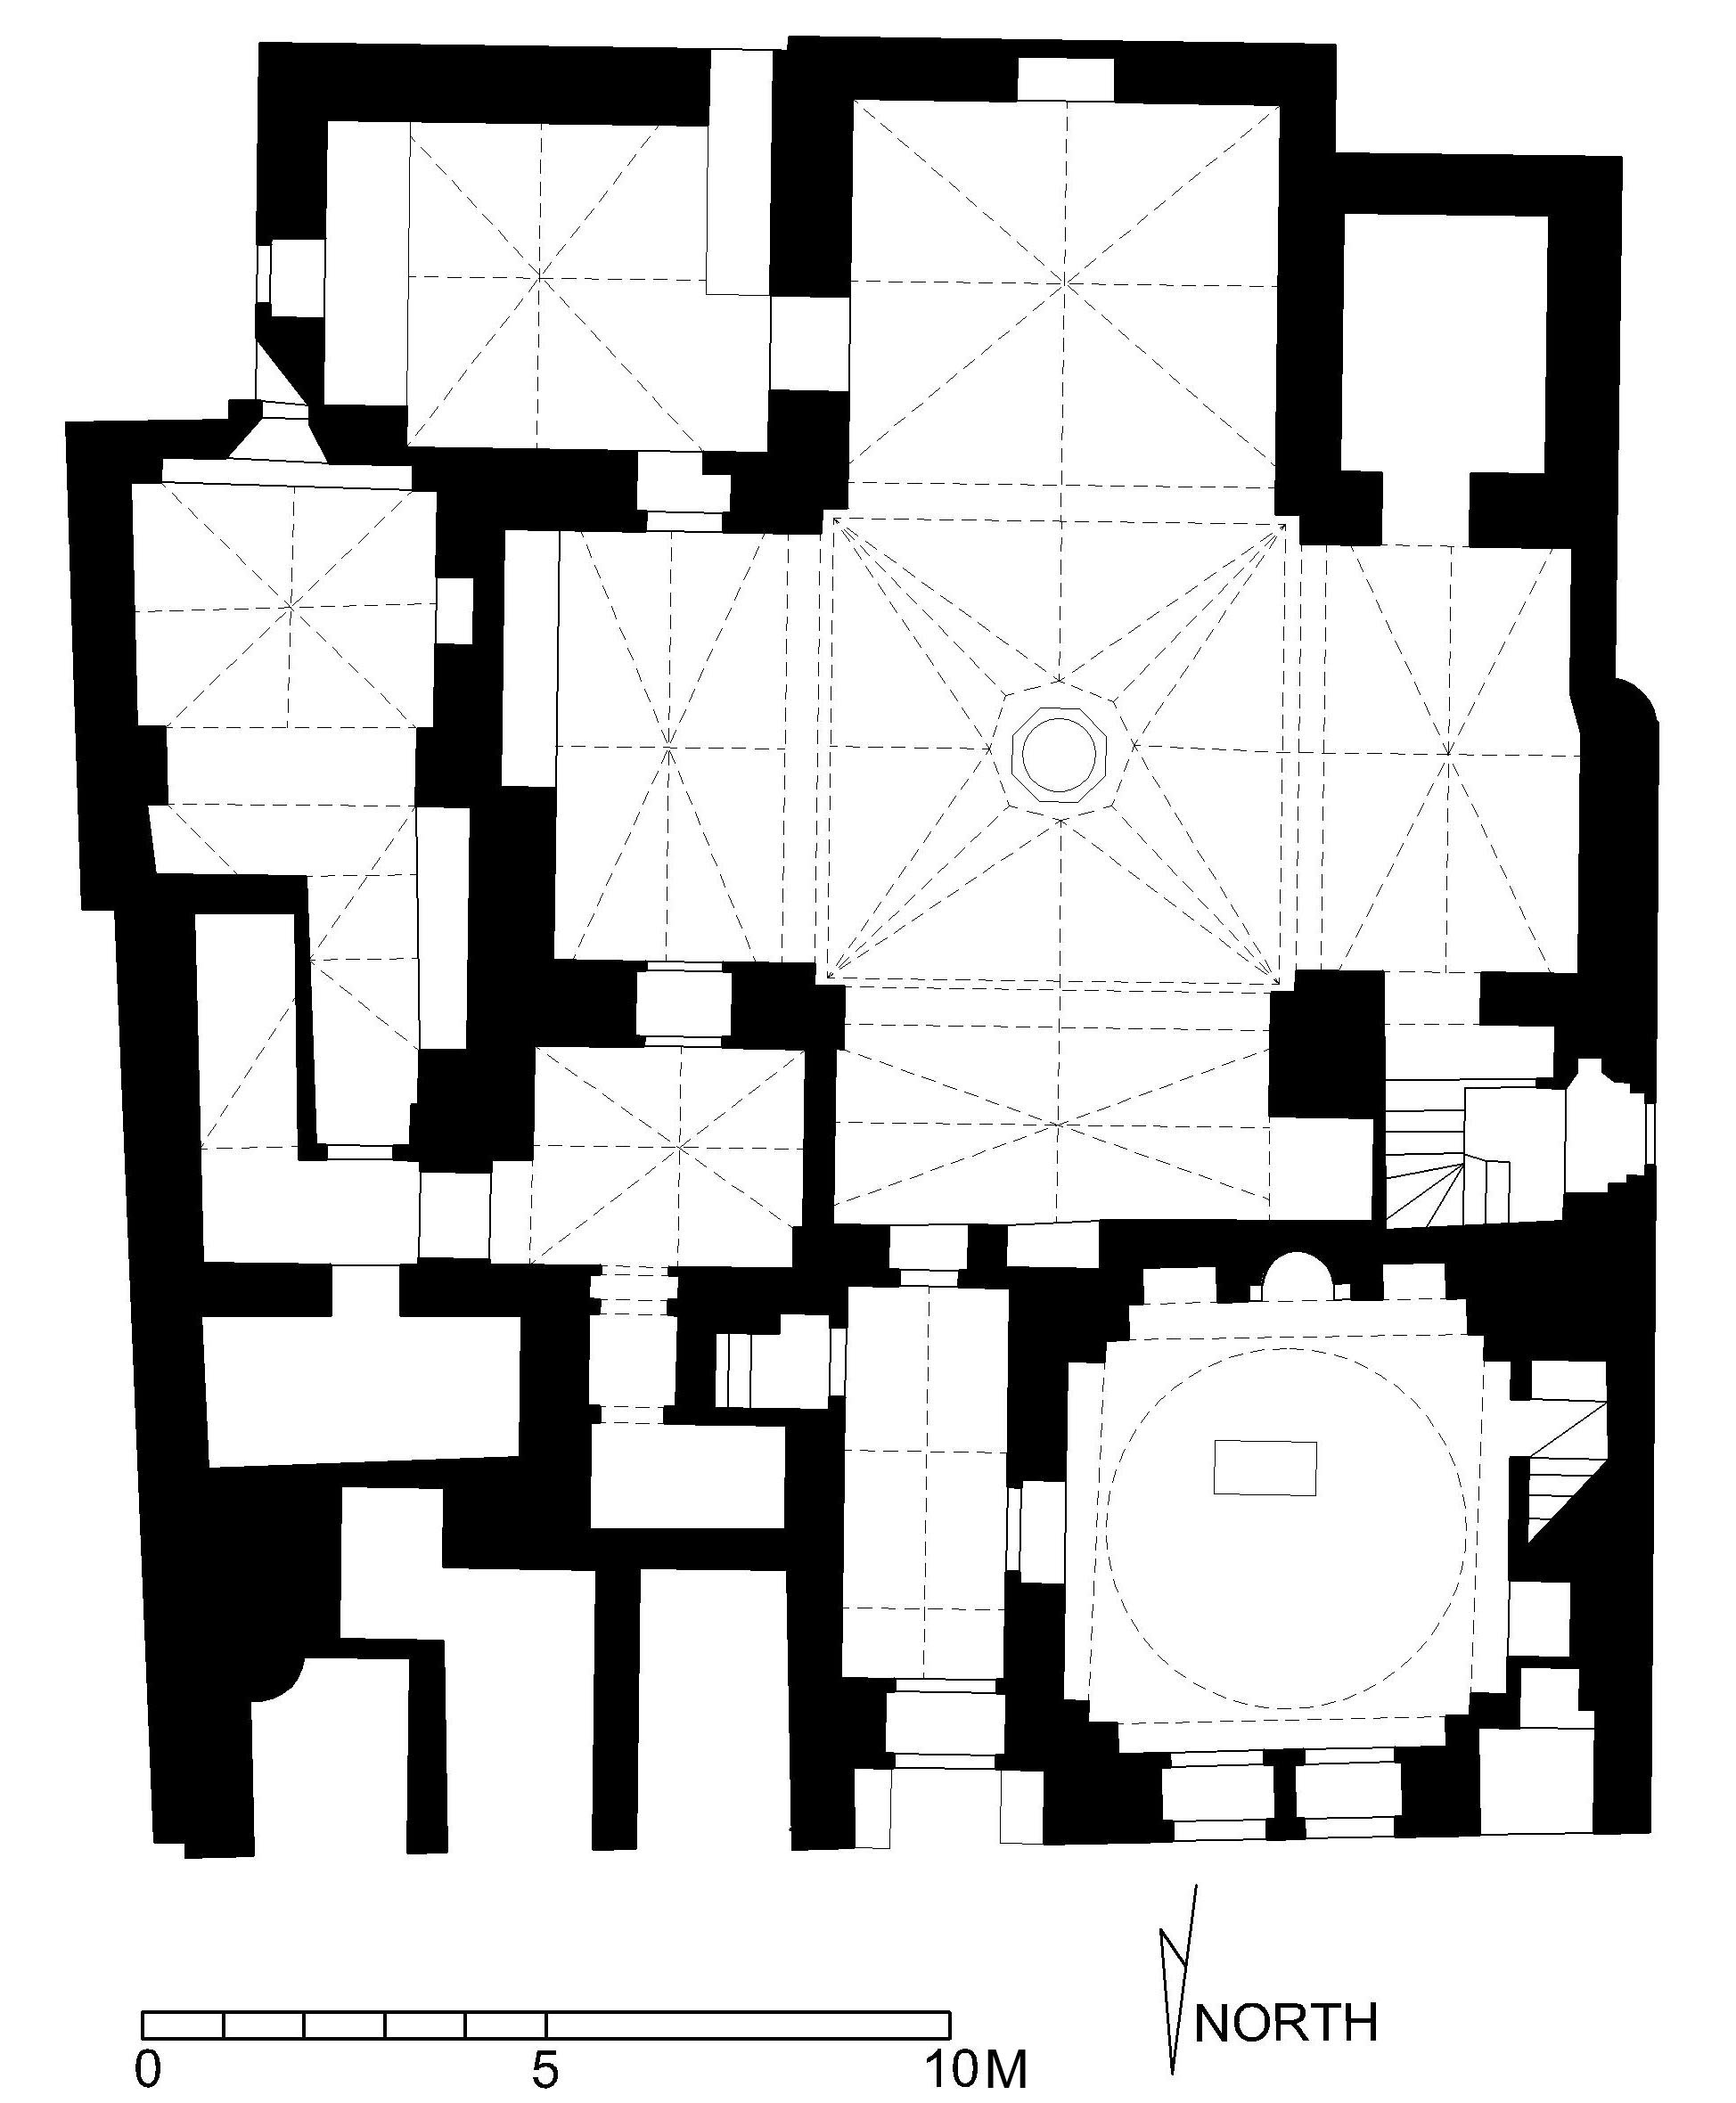 Al-Tashtamuriyya - Floor plan of funerary madrasa (after Meinecke) in AutoCAD 2000 format. Click the download button to download a zipped file containing the .dwg file.